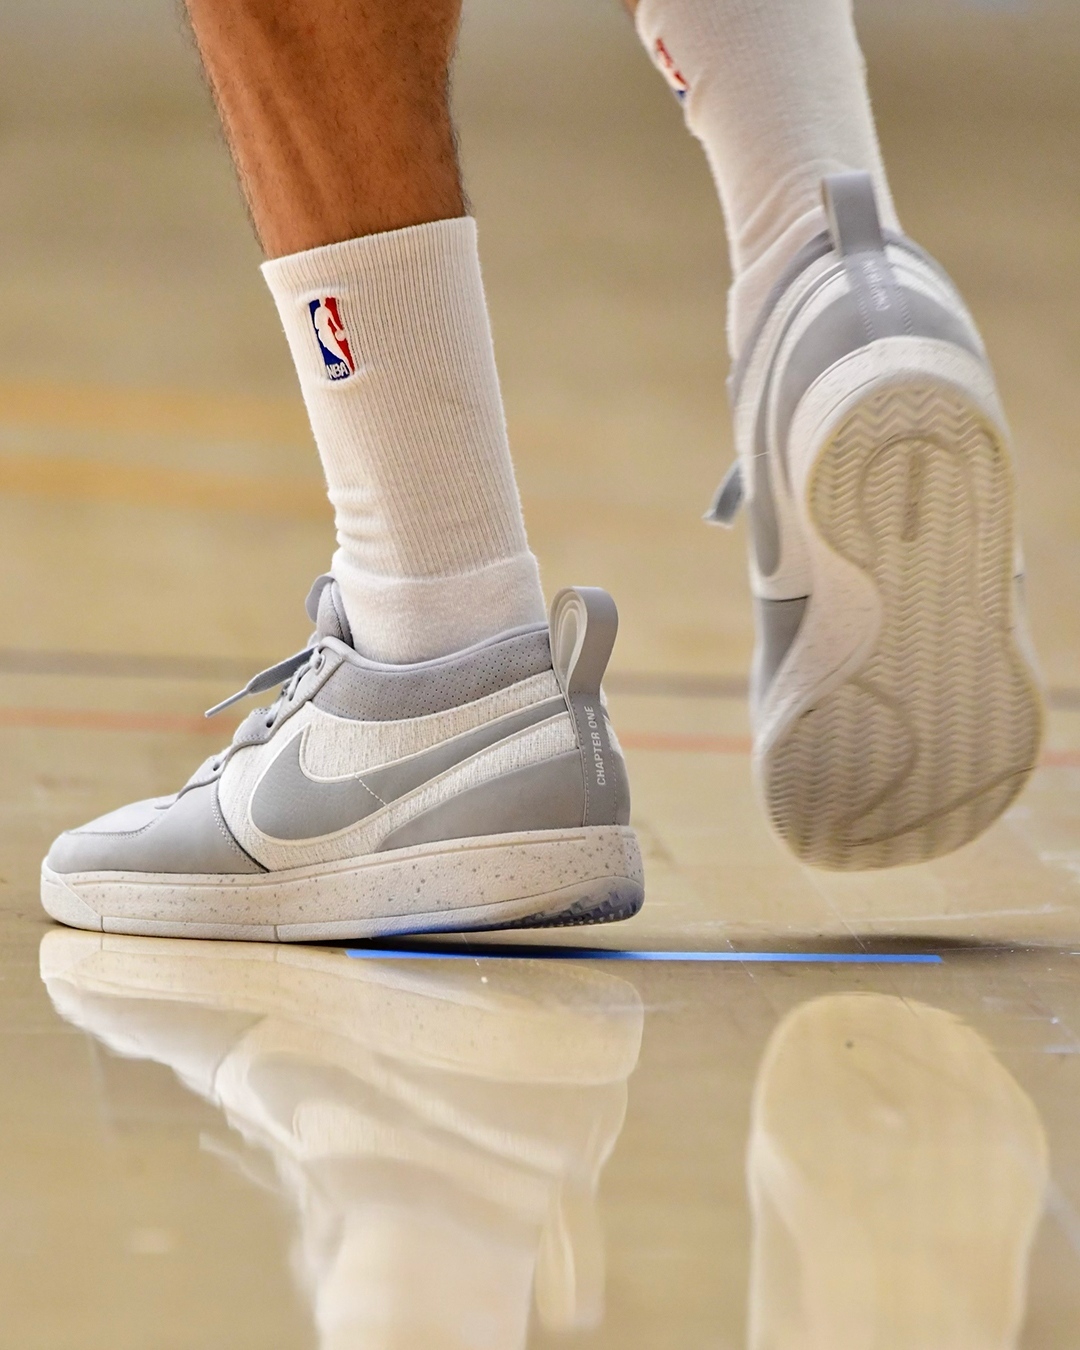 Devin Booker in the nike air force 1 sand springs water bill "Cool Grey"